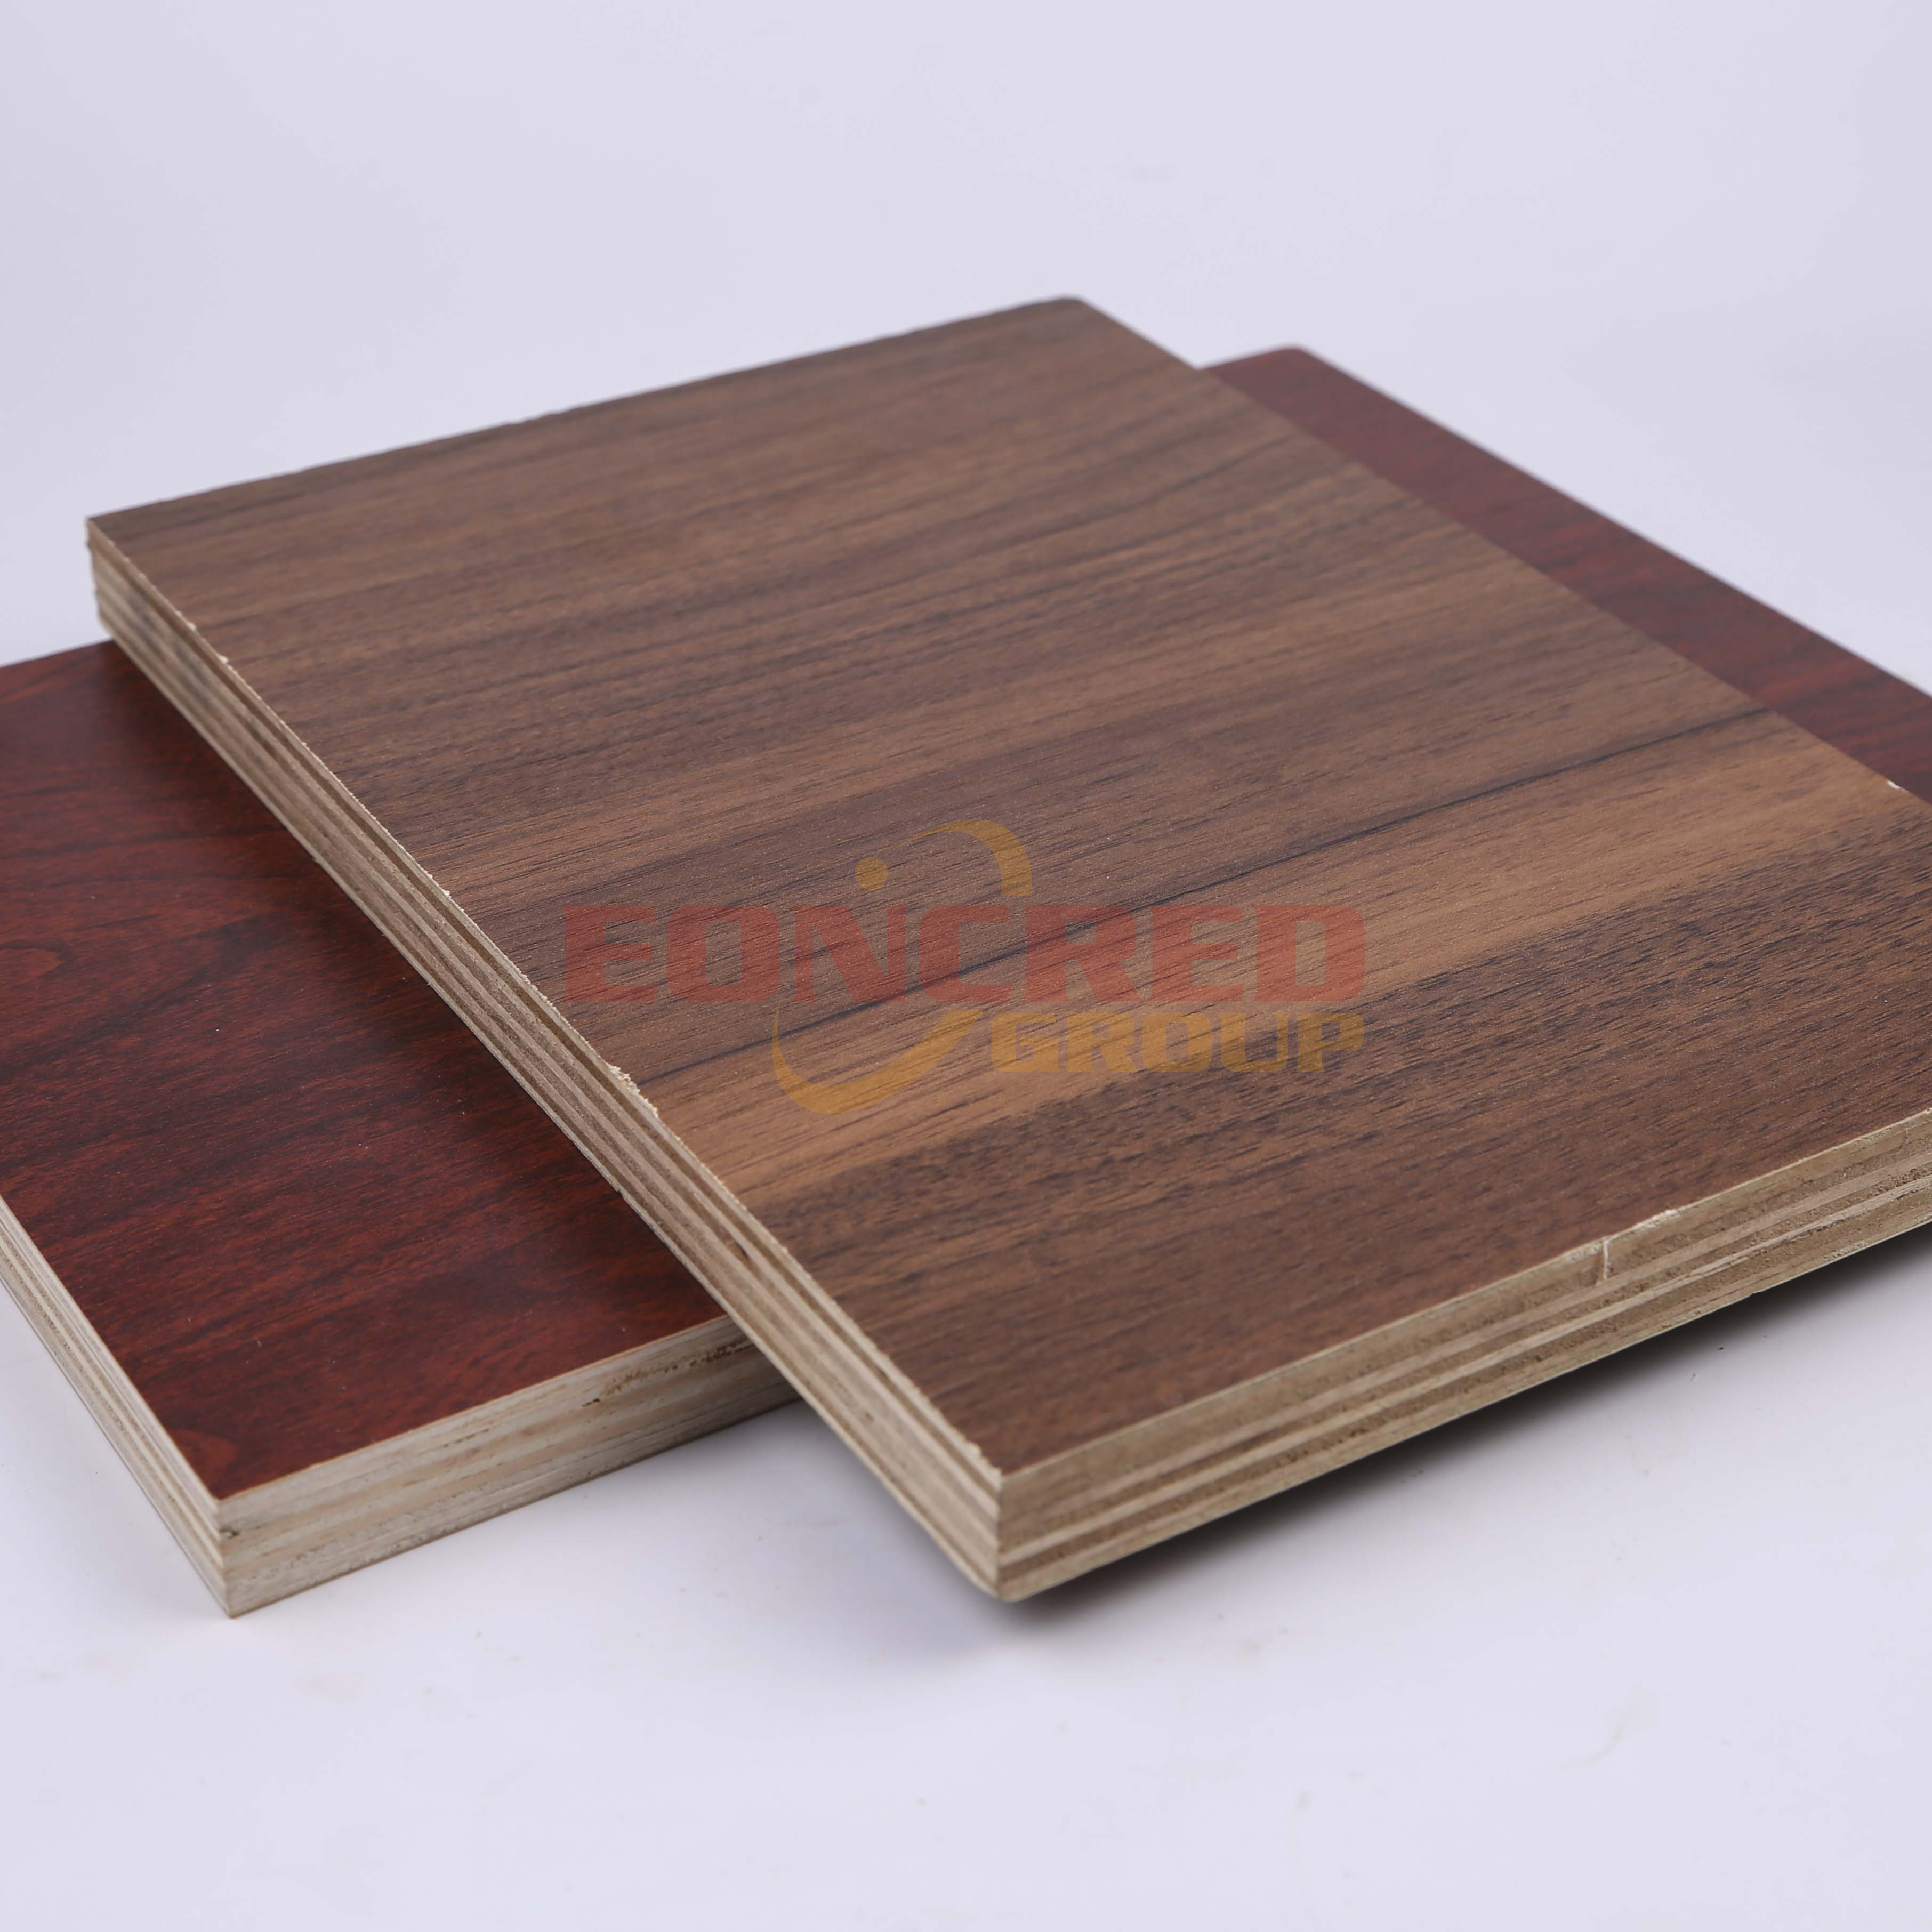 High Quality Plywood Make of Plywood Laser Engraving Machines 